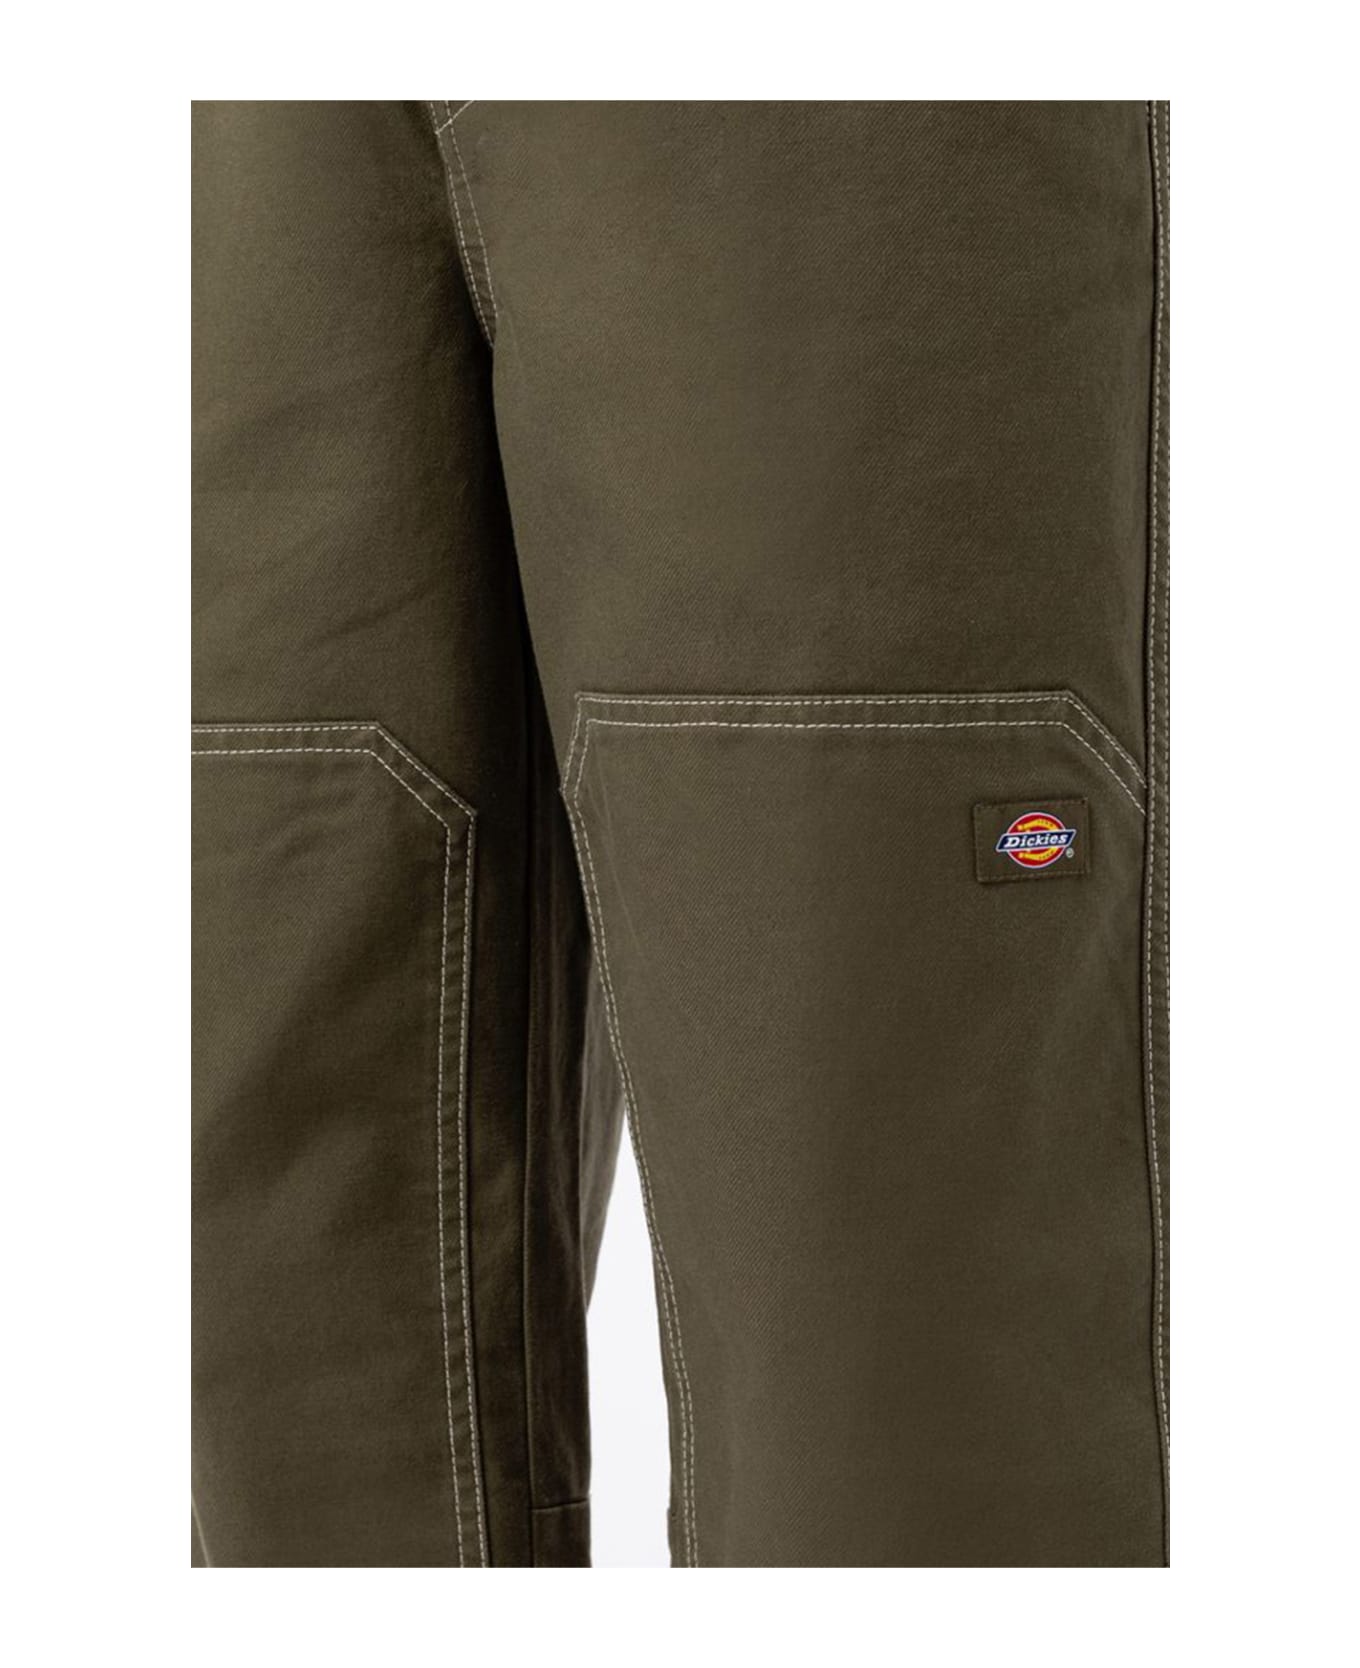 Dickies Florala Pant Military Green Cotton Double Knee Work Pant - Florala Pant - ARMY GREEN